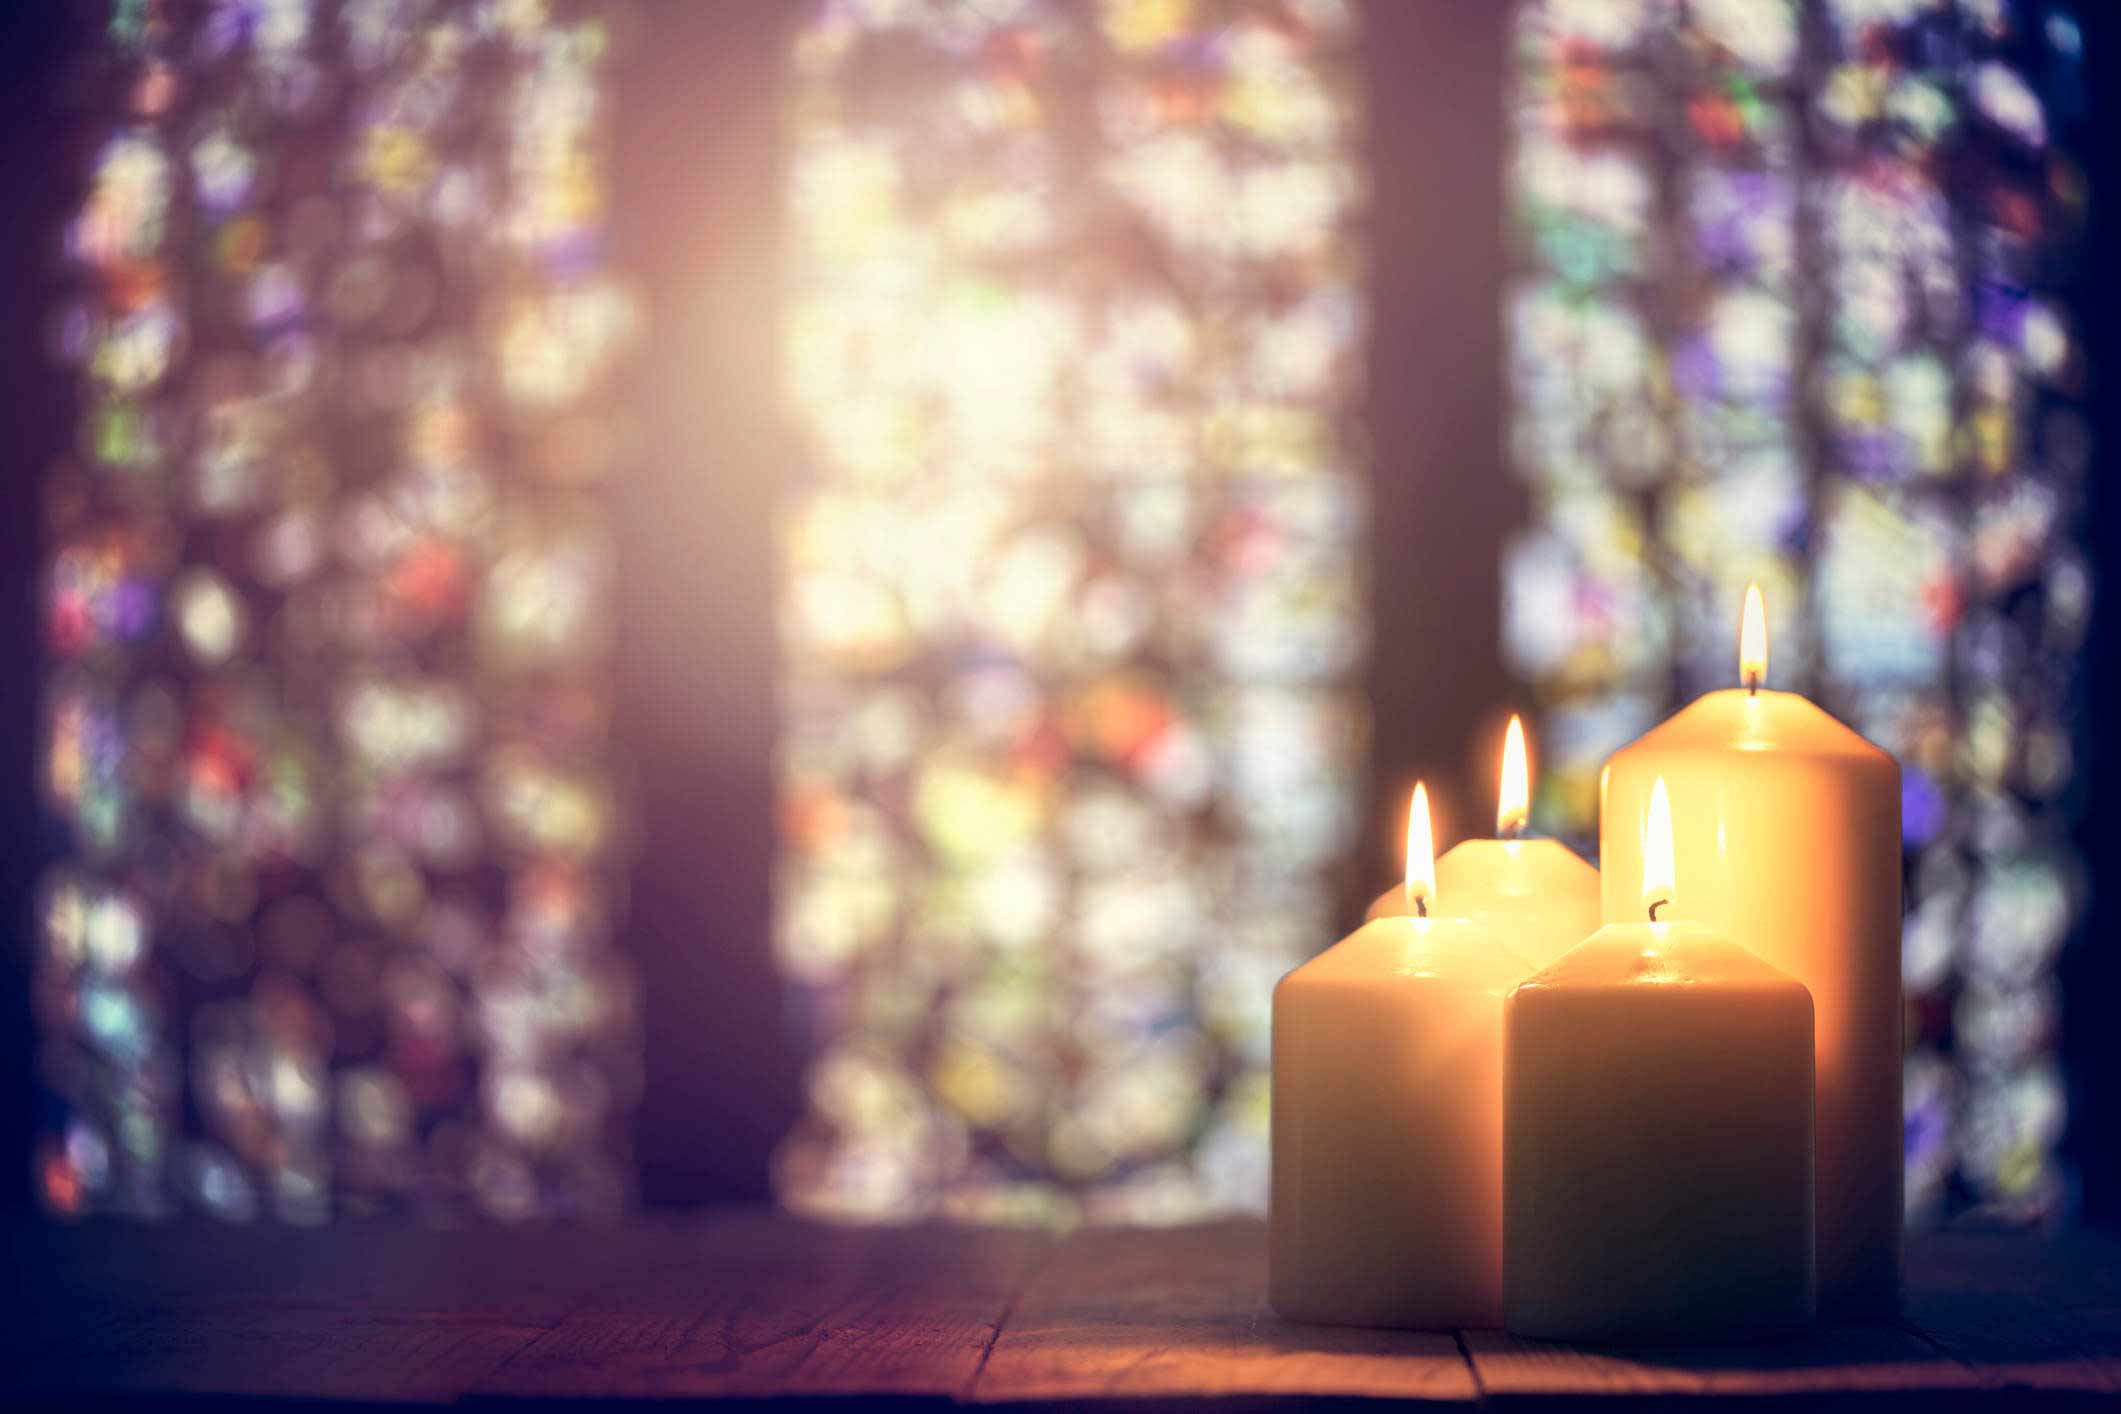 Lit candles in front of a stained glass window.